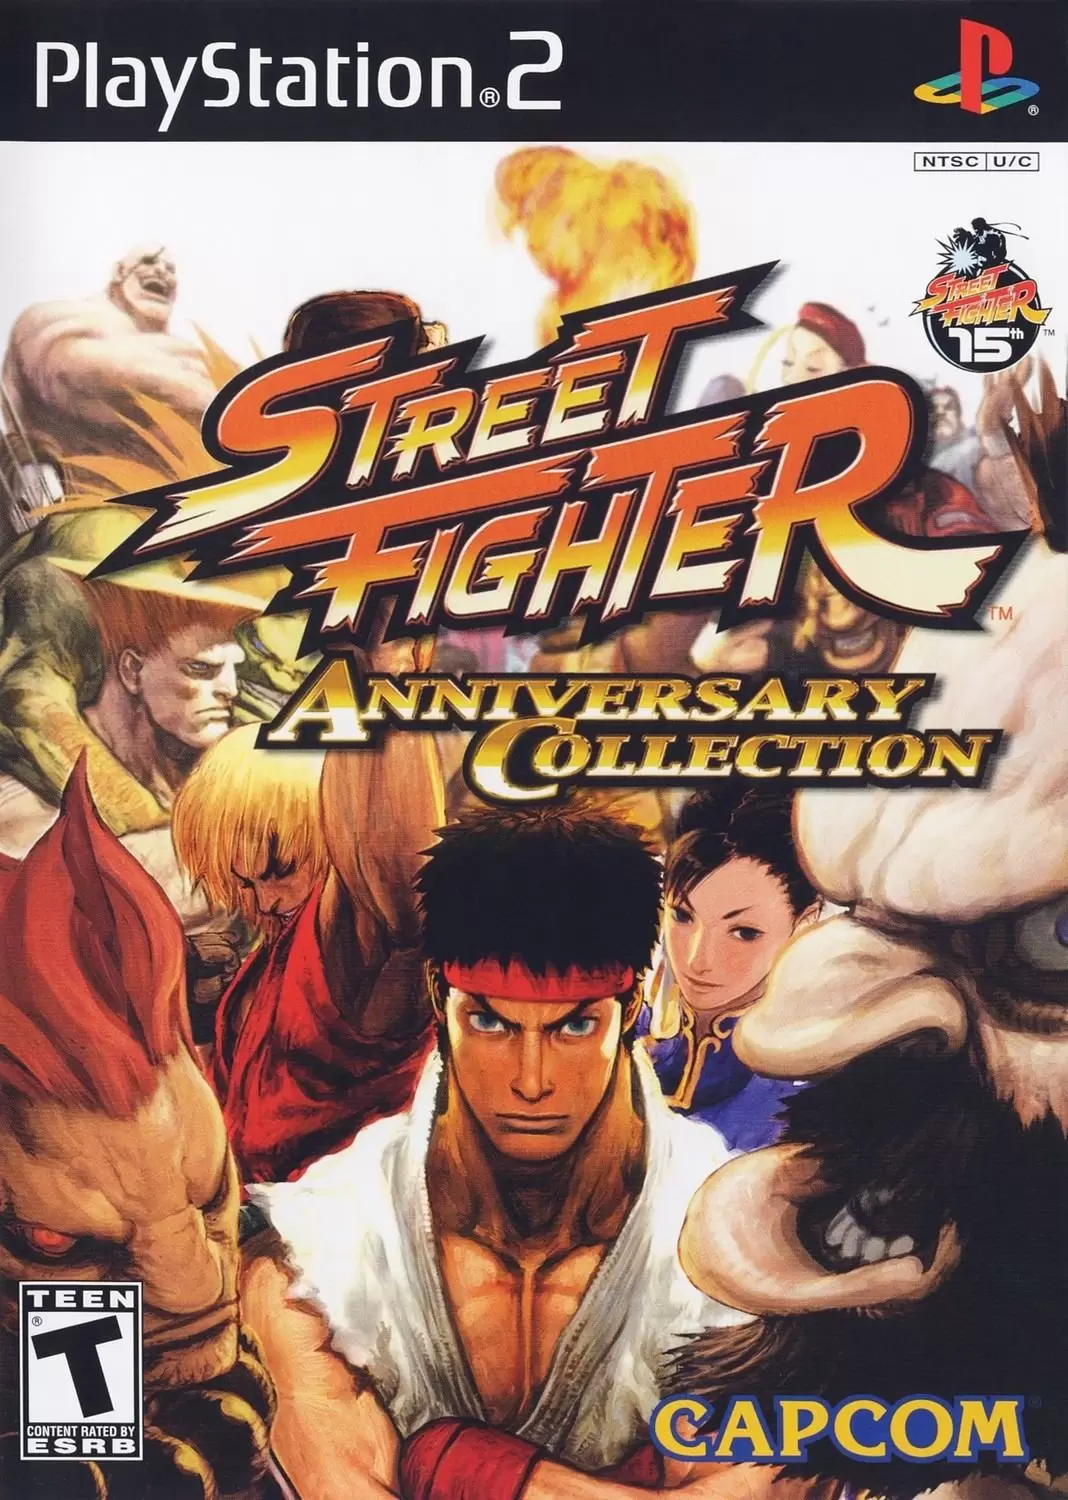 PS2 Games - Street Fighter Anniversary Collection